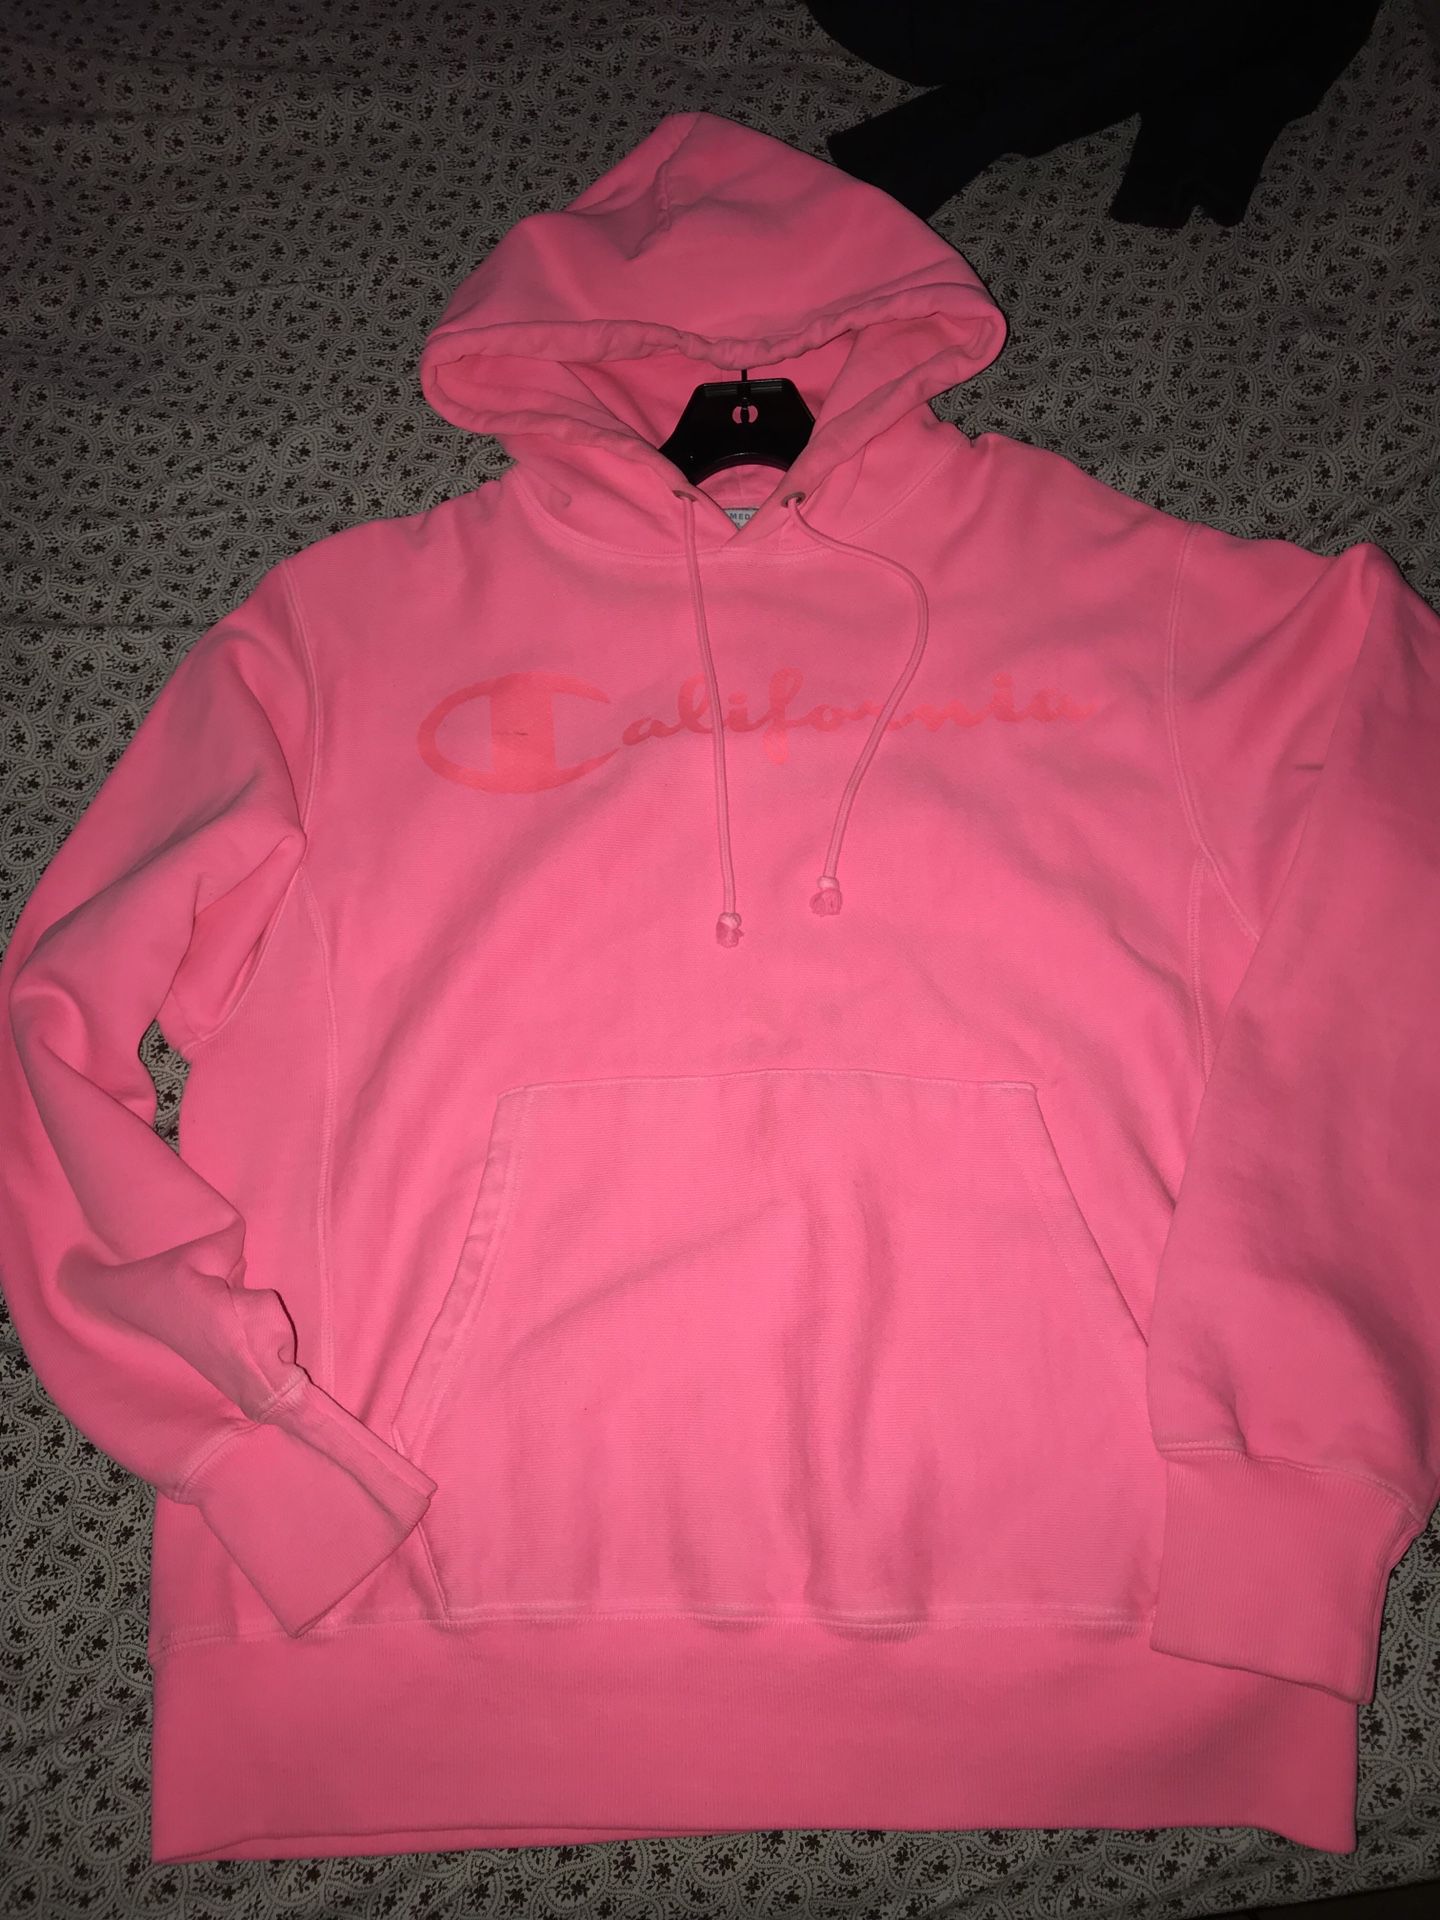 Champion California hoodie, pink. Great condition! Only worn like once. THROW ME OFFERS! Do not pay for it without making me offer. I’ll not ship it!